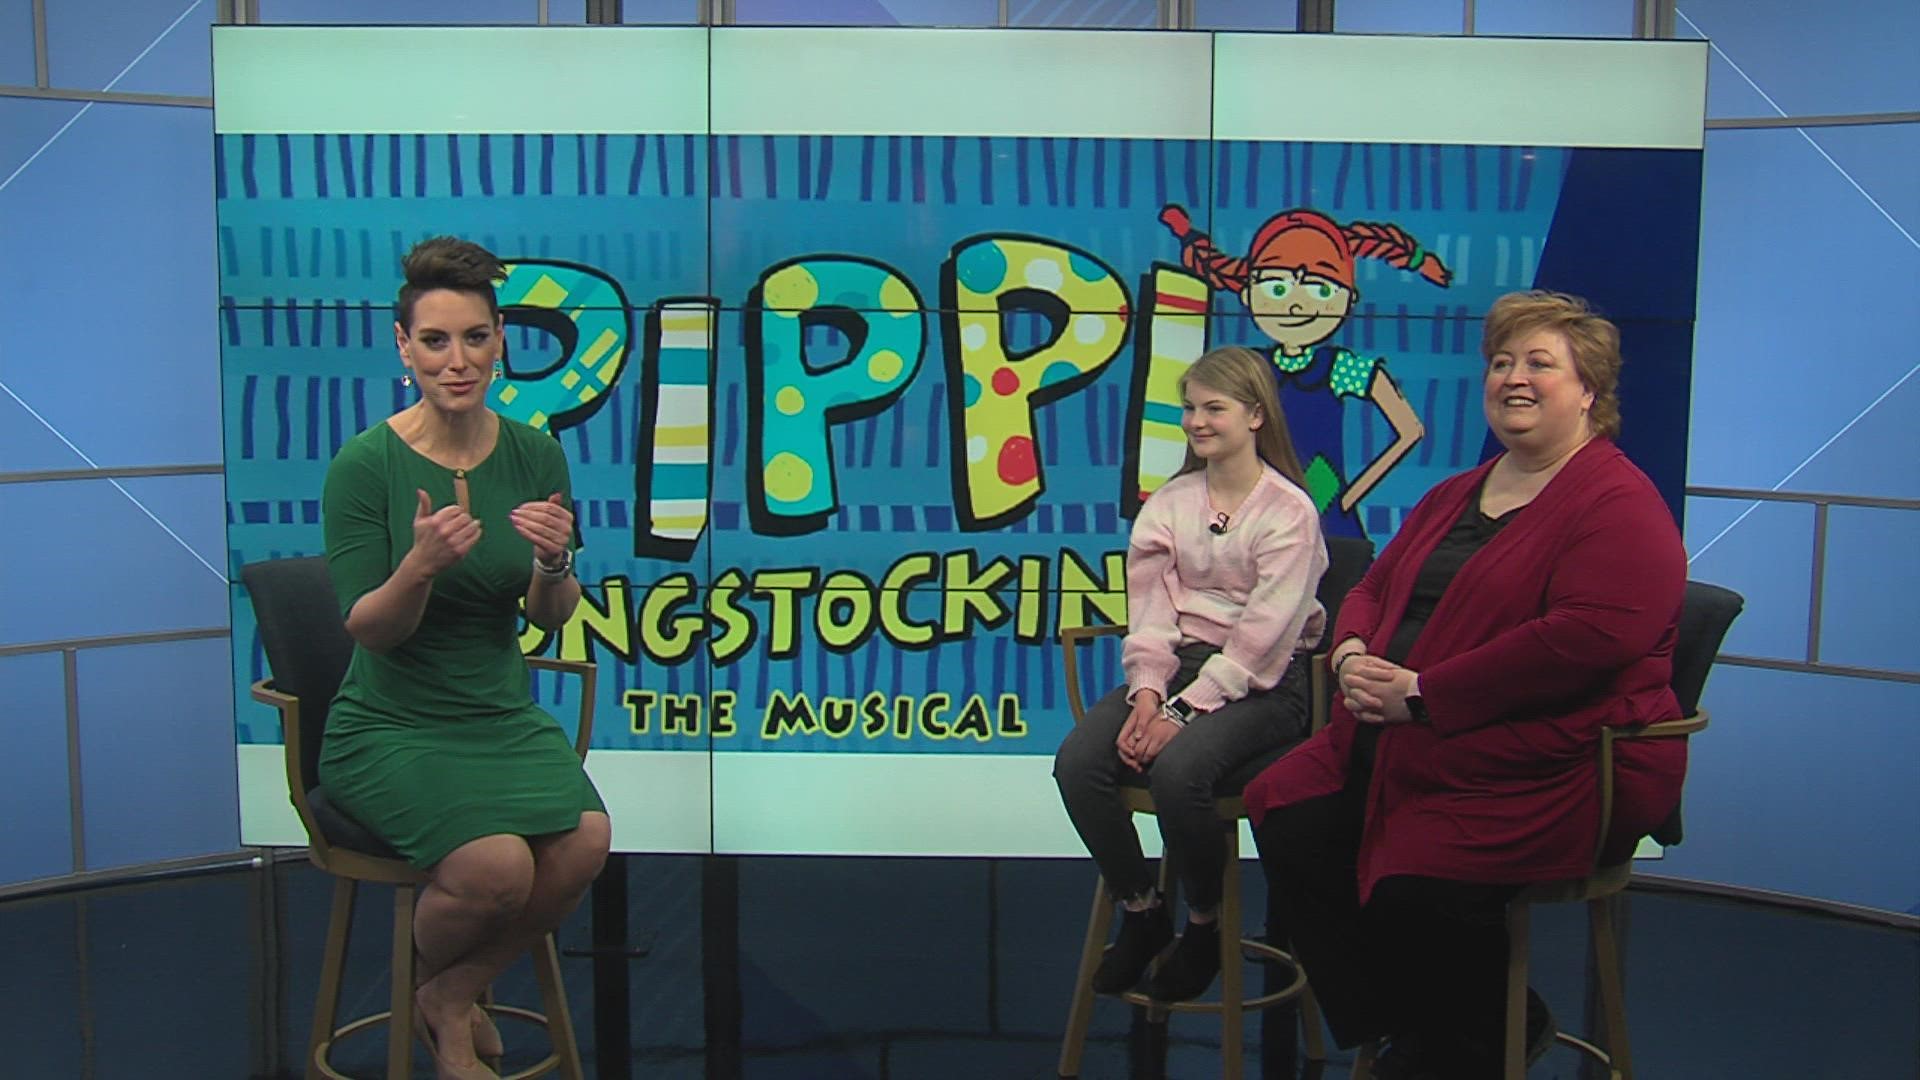 Melissa Chavas-Miller, director of Des Moines Playhouse, and Isabella Rempe, lead actor, explain everything you need to know about the new show, opening April 22.